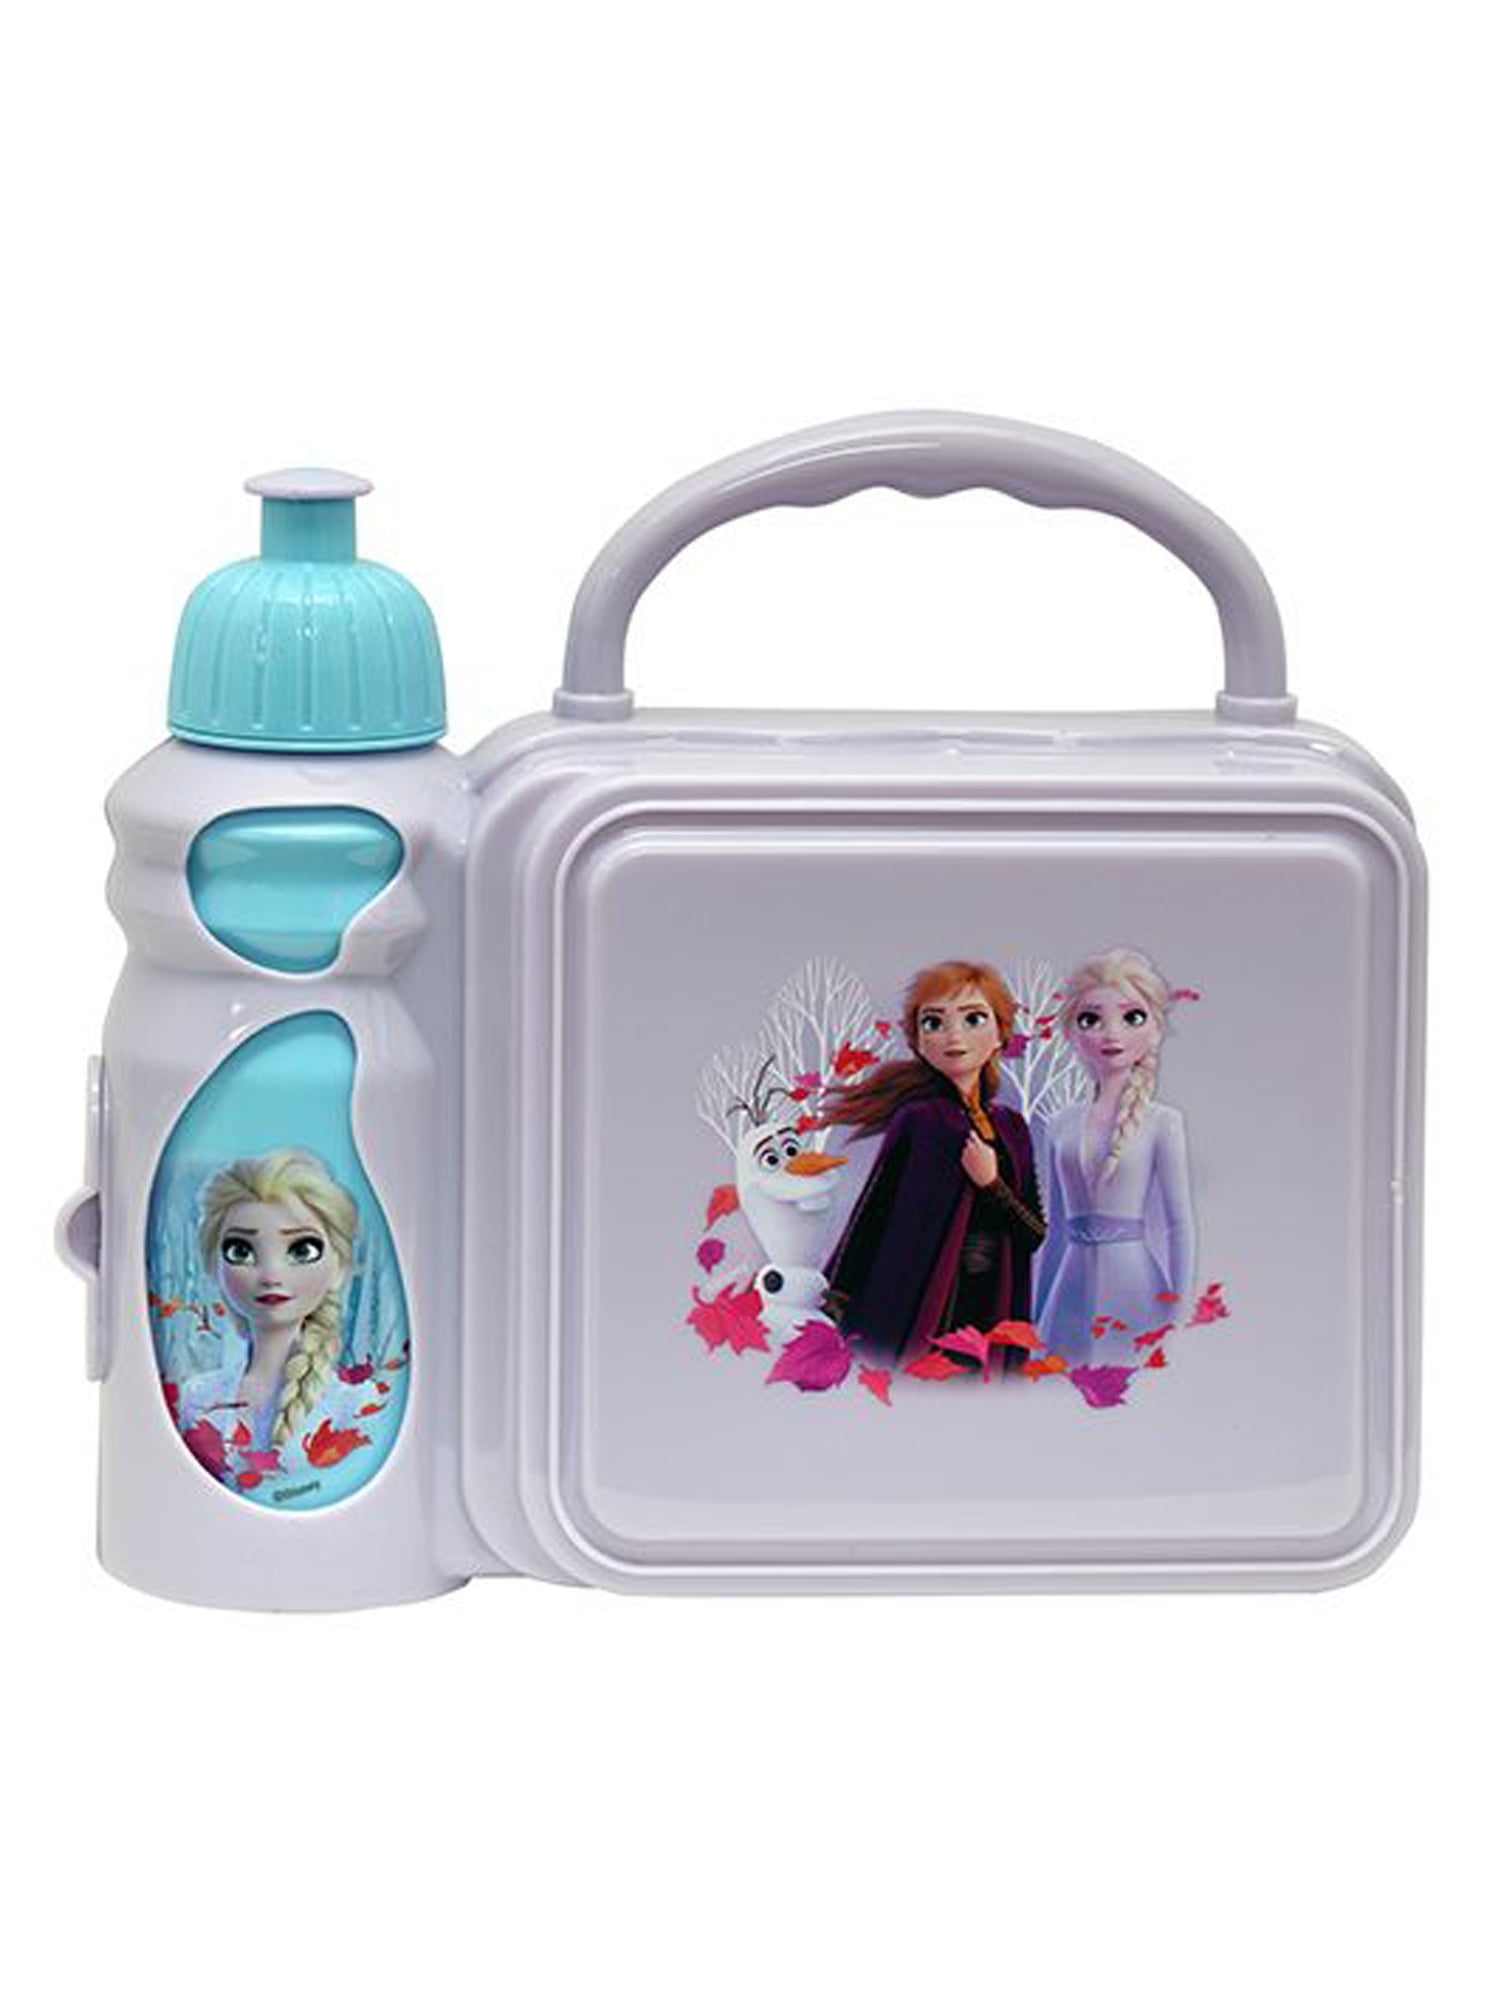 Anna and Elsa Lunch Box - Frozen 2 – Varieties Hub Co.